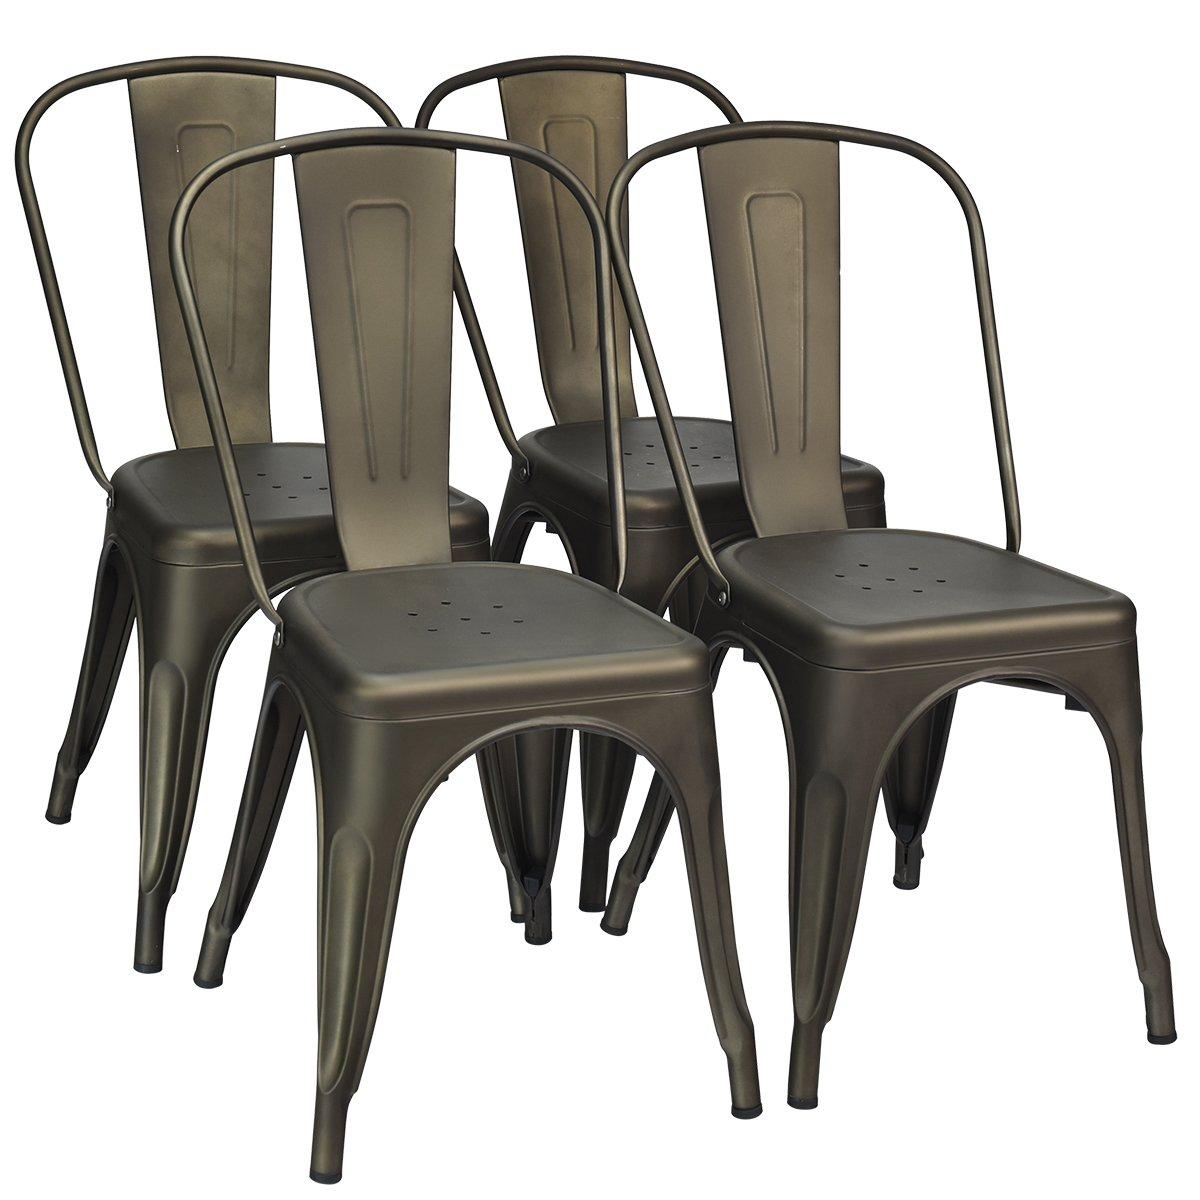 Set of 4 Kitchen Dining Chairs Stackable Vintage Metal Chair Backrest Side Chair